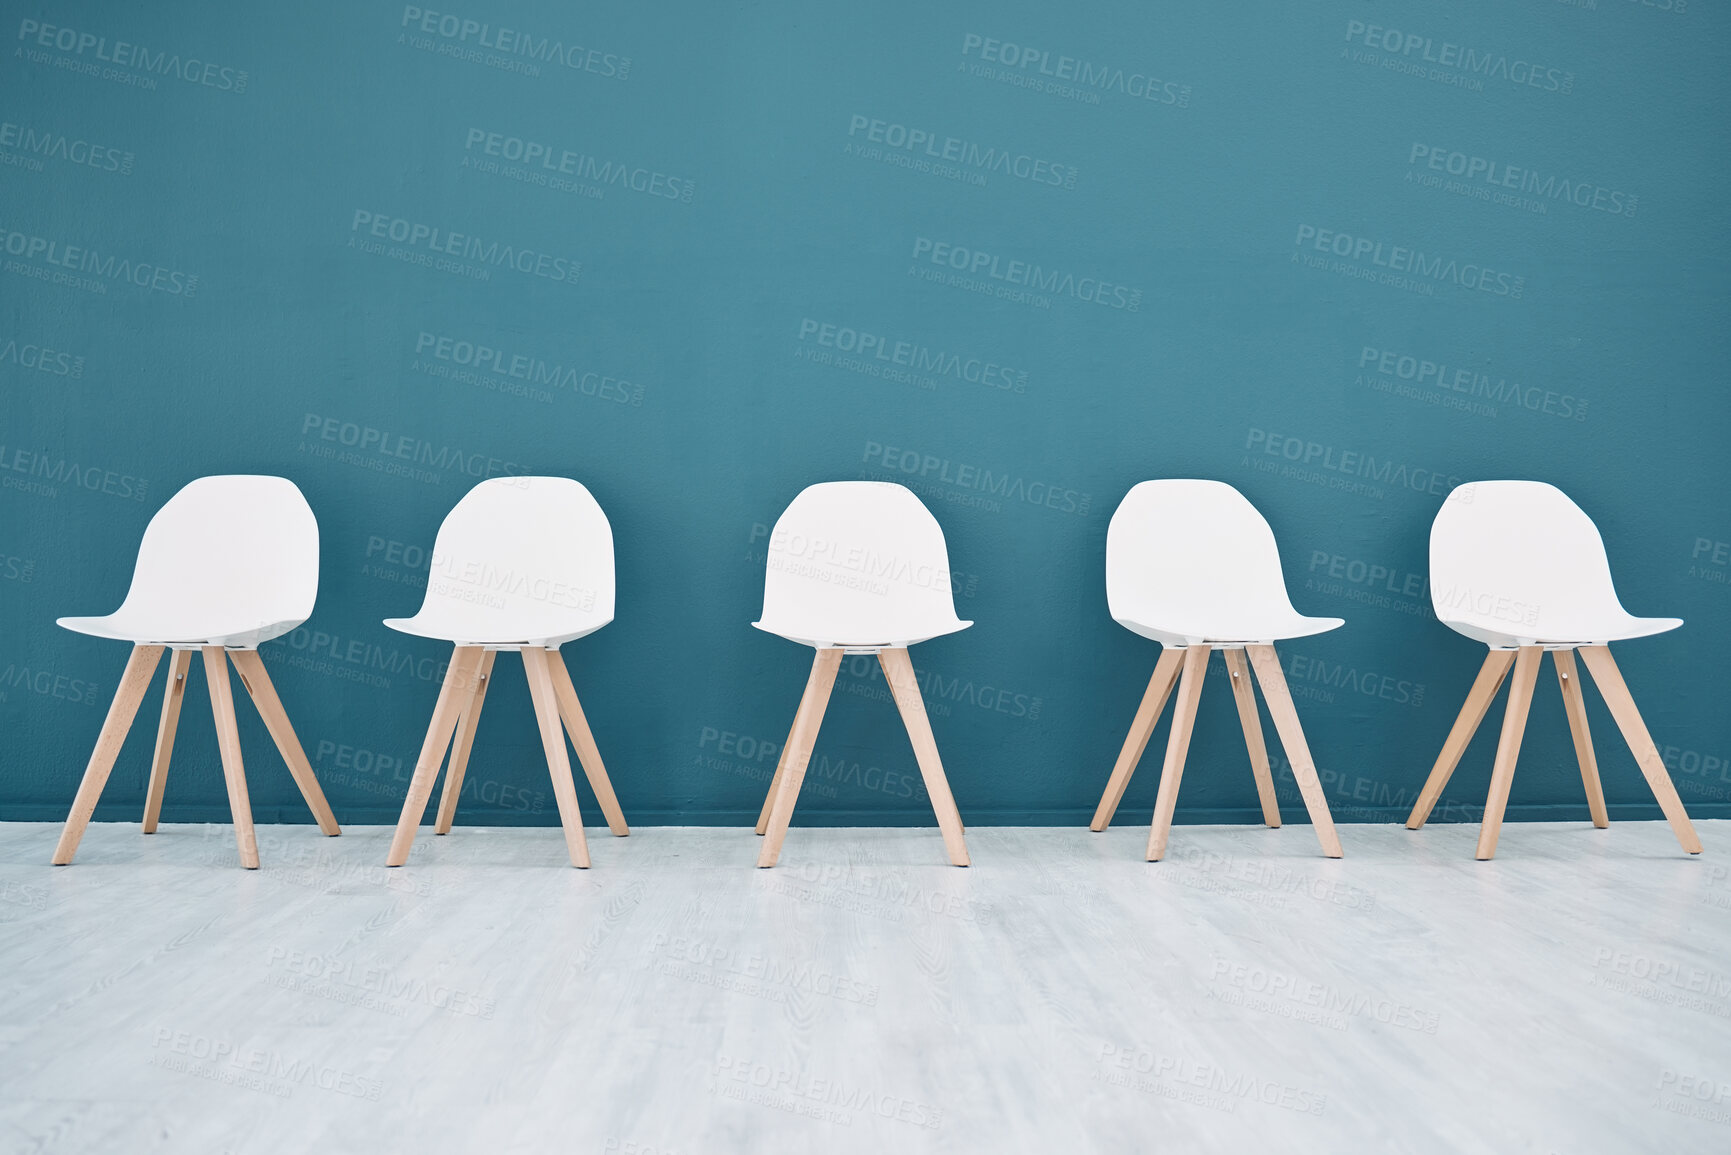 Buy stock photo We are hiring, job interview and recruitment with empty furniture and mockup for feedback, news and vote. Review, idea and opinion with chair seats for unemployment, networking and poll survey 